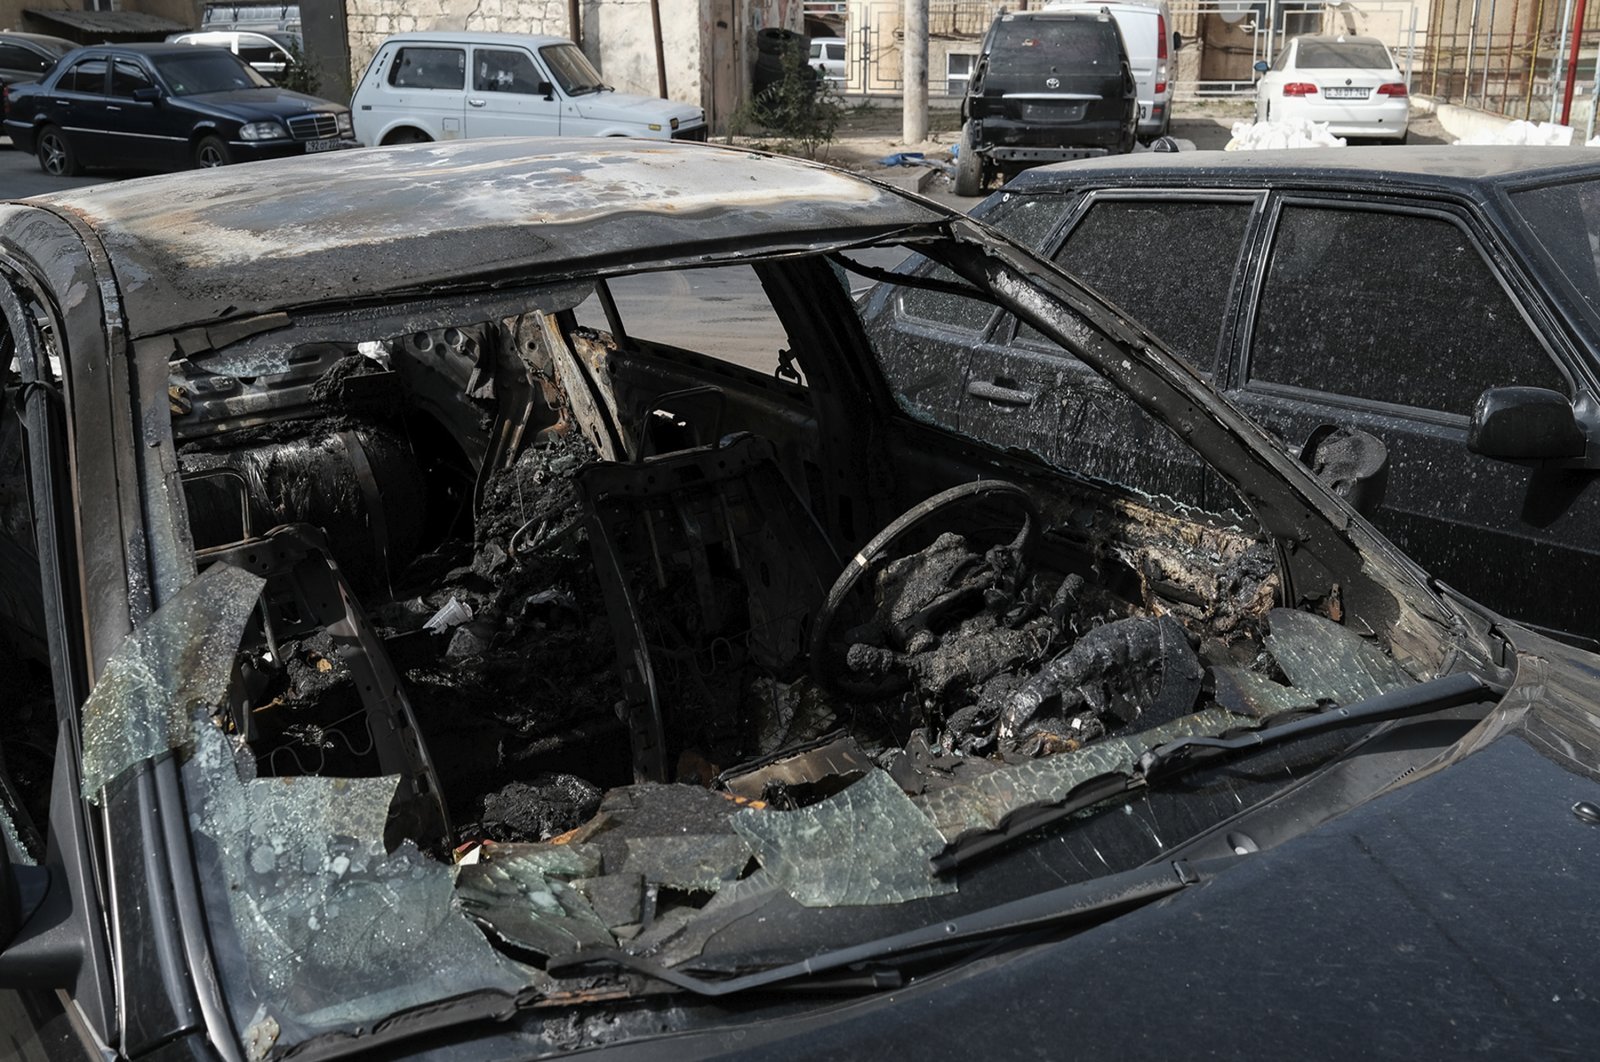 A car destroyed by shelling in Stepanakert, the self-proclaimed capital of Nagorno-Karabakh, Azerbaijan, Sept. 29, 2020. (AP Photo)